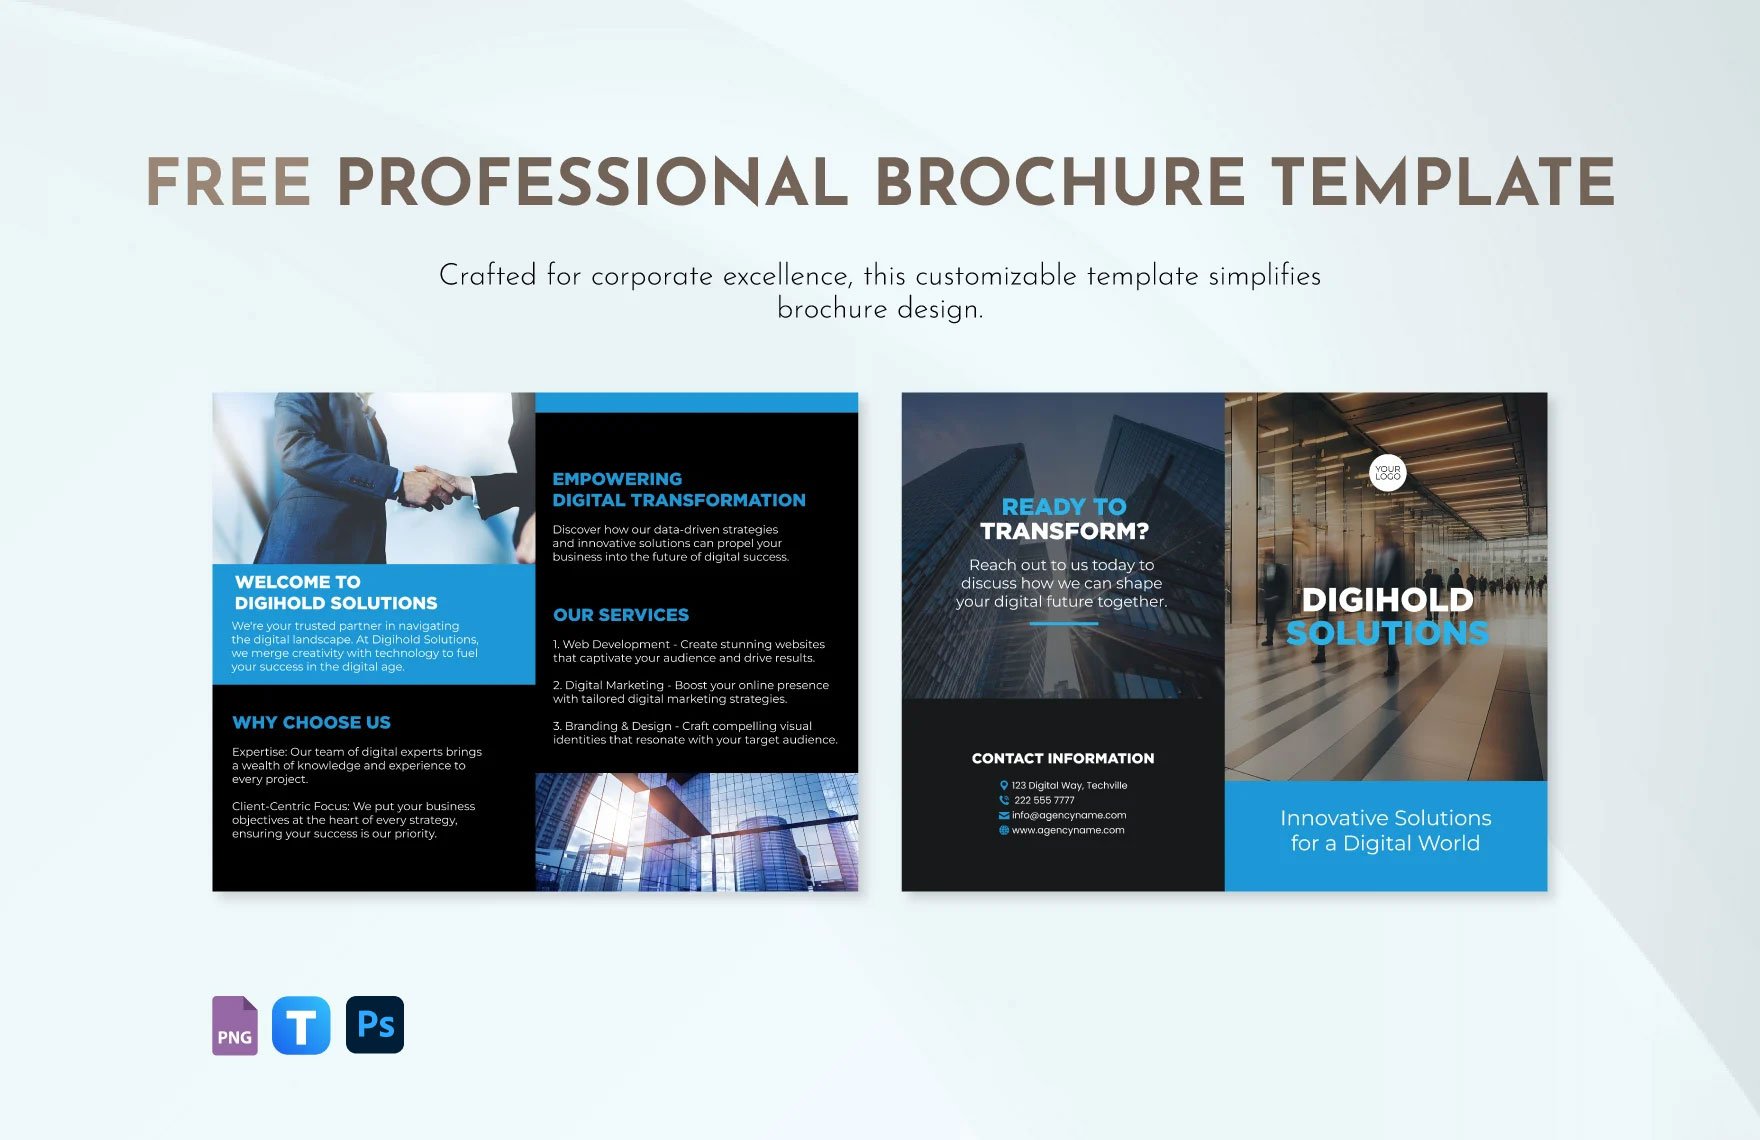 Free Professional Brochure Template